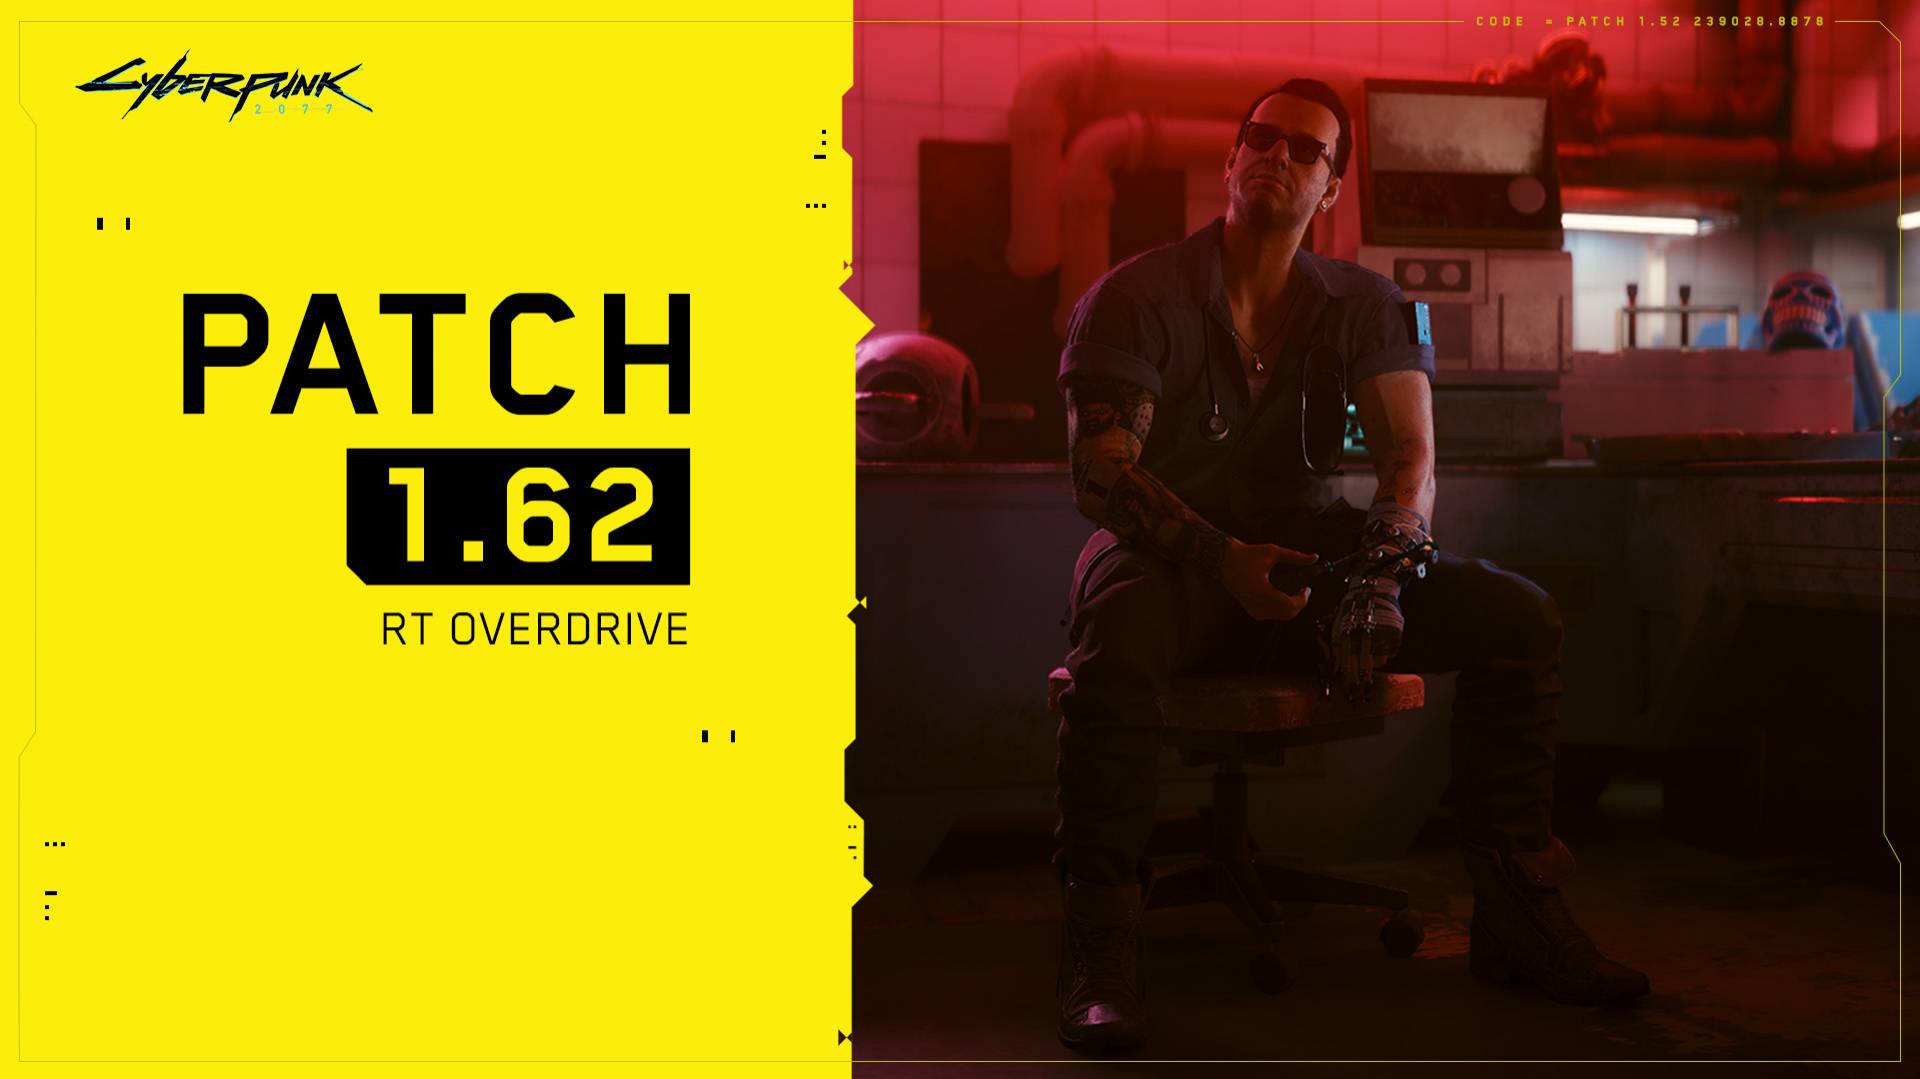 Patch 1.62 — Ray Tracing: Overdrive Mode